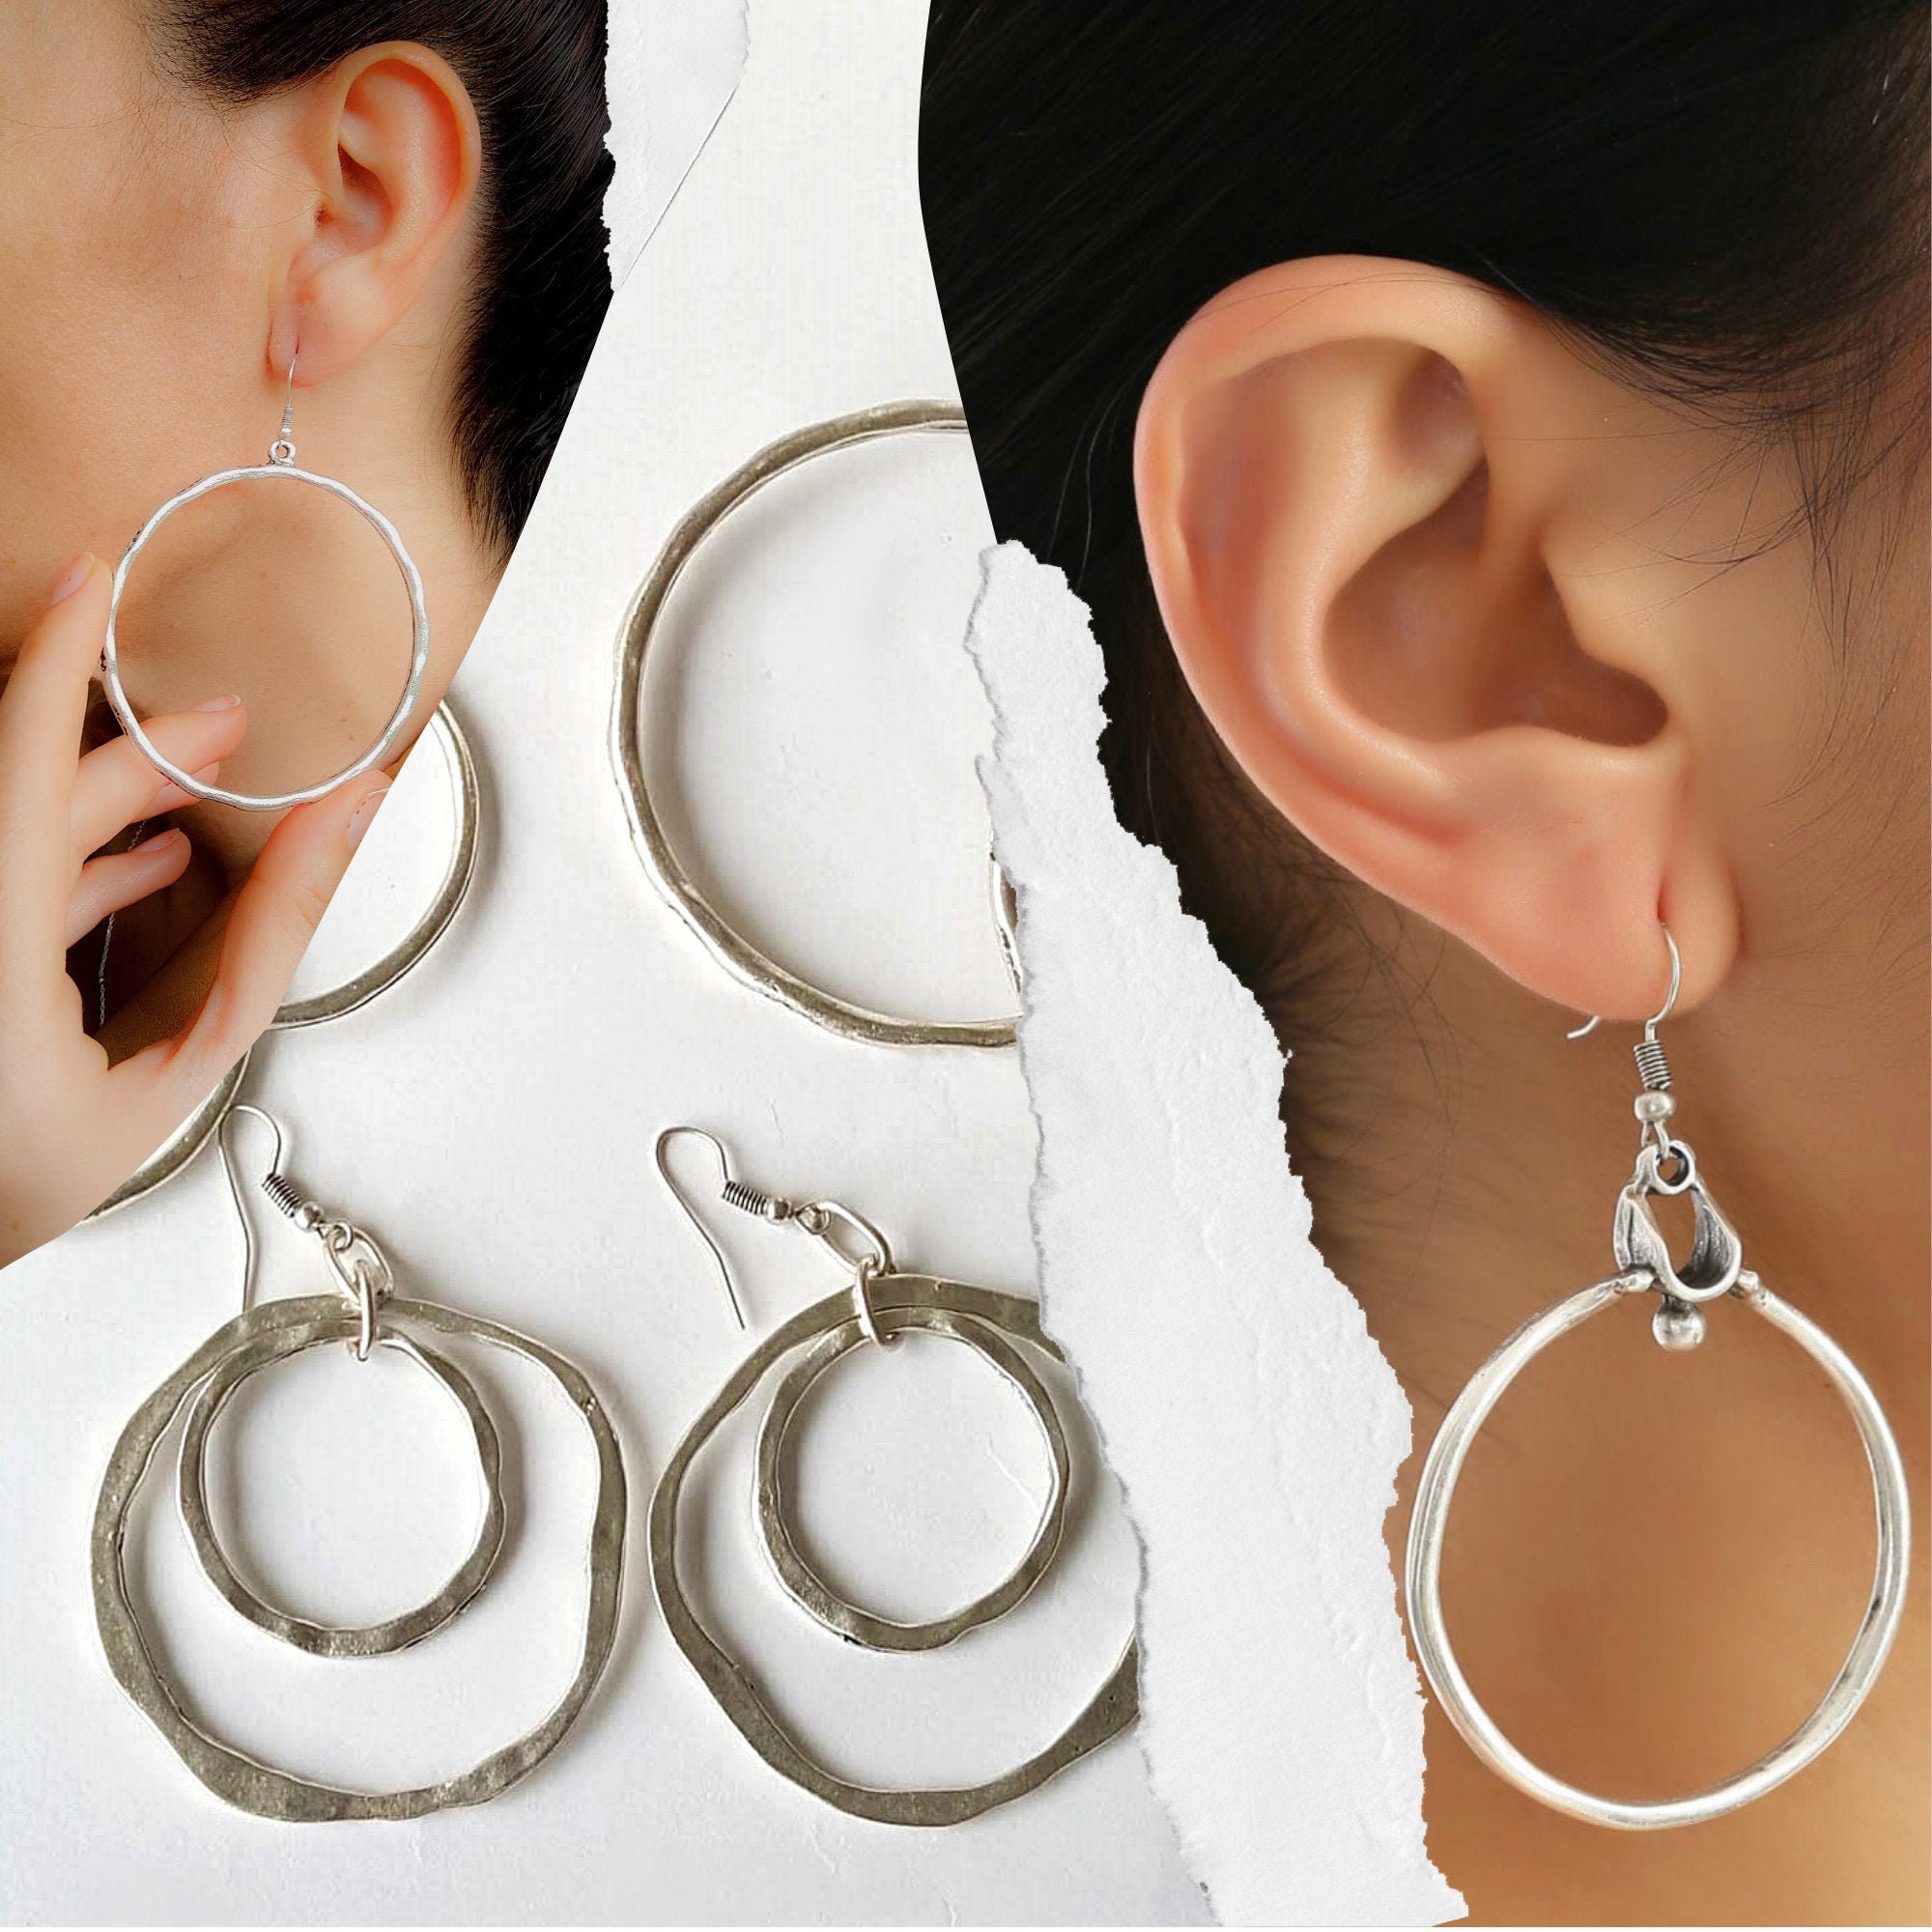  White Big Boobs Bottom Hot Sexy Earrings Dangle Hoop Jewelry  Drop Circle: Clothing, Shoes & Jewelry